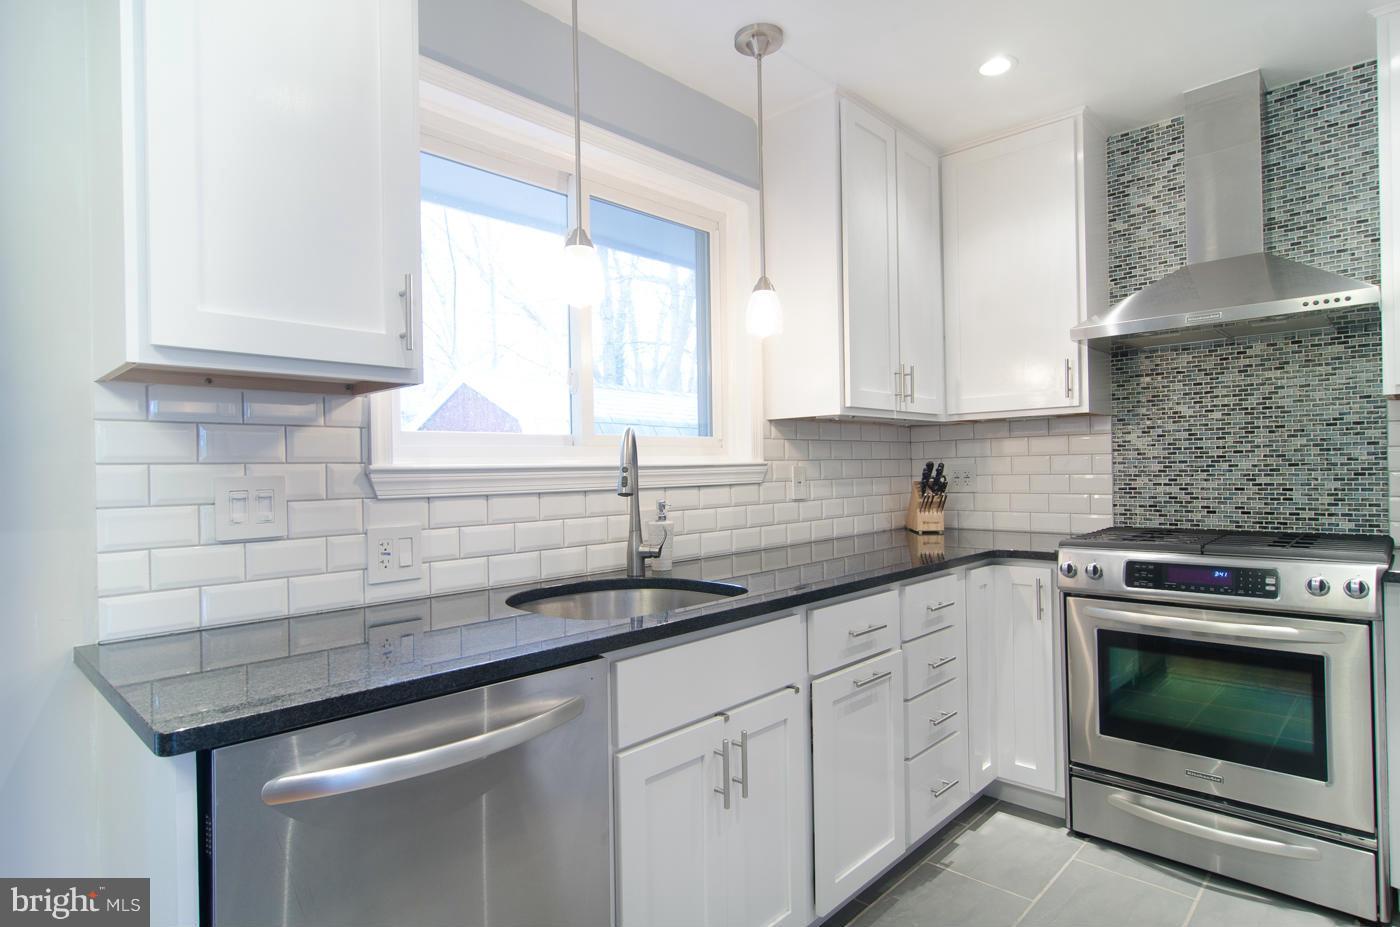 a kitchen with granite countertop a sink stainless steel appliances white cabinets and a window